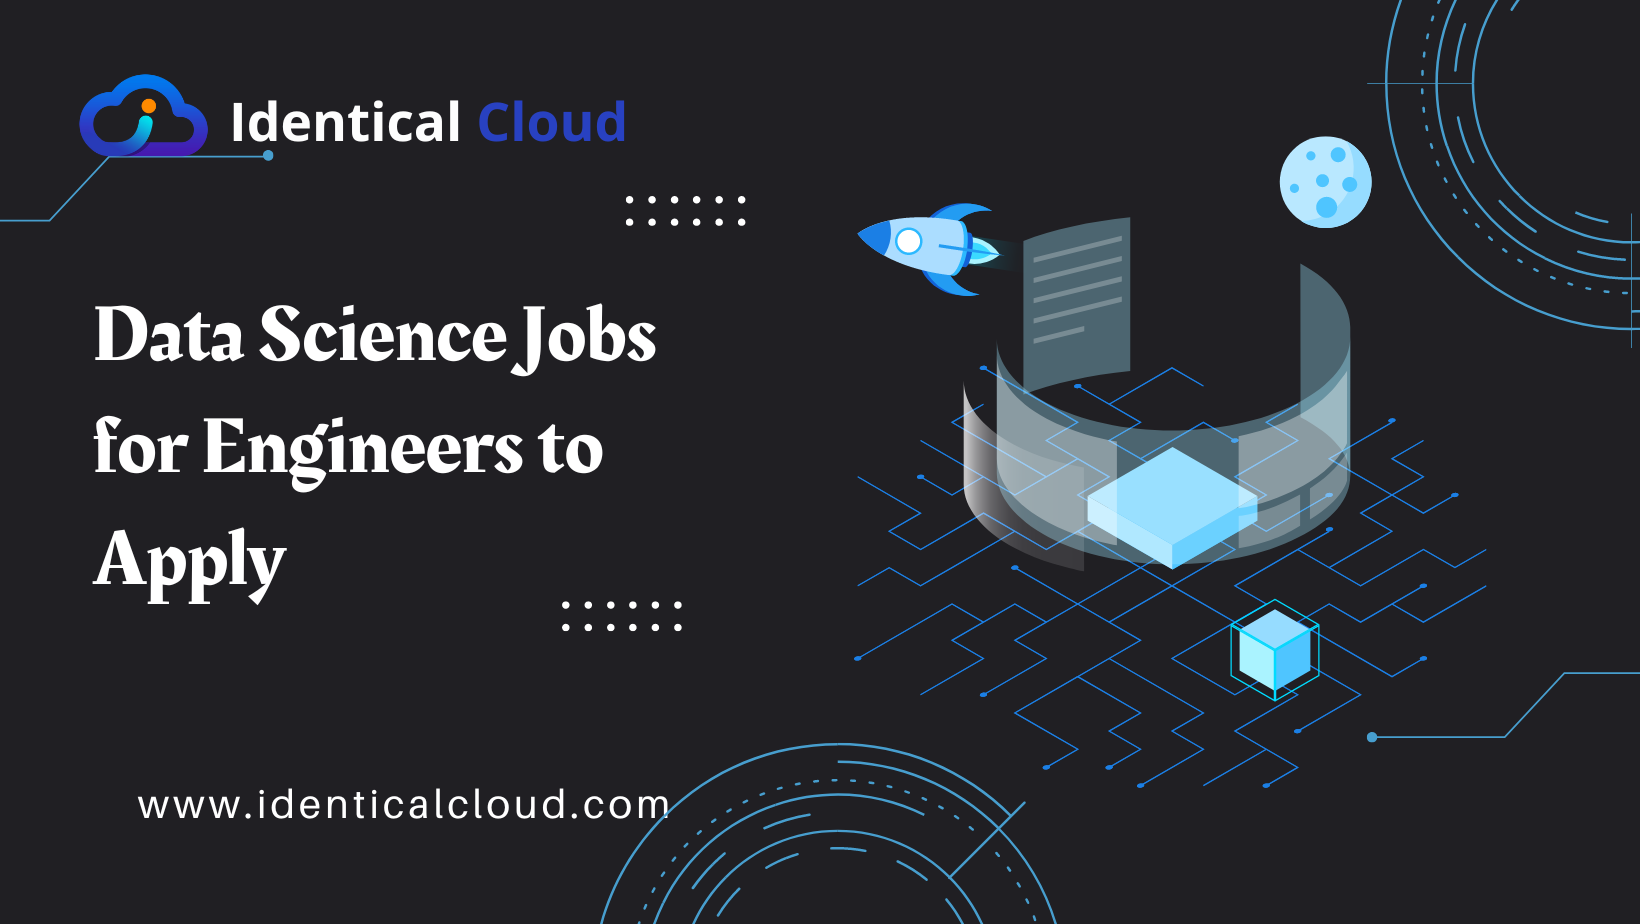 Data Science Jobs for Engineers to Apply - identicalcloud.com